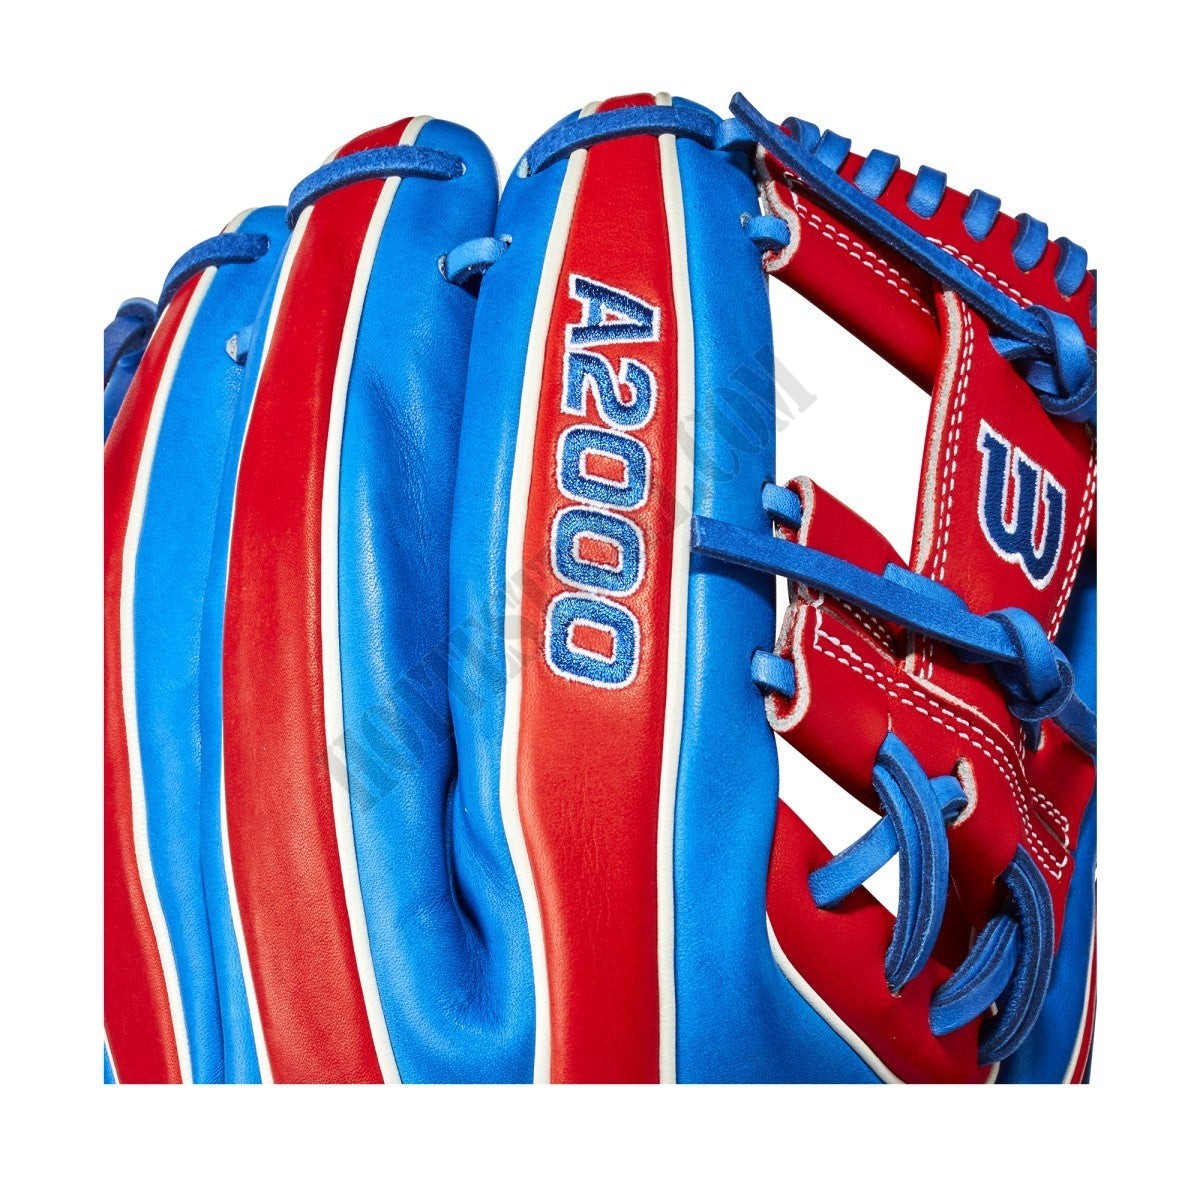 2021 A2000 1786 Puerto Rico 11.5" Infield Baseball Glove - Limited Edition ● Wilson Promotions - -6